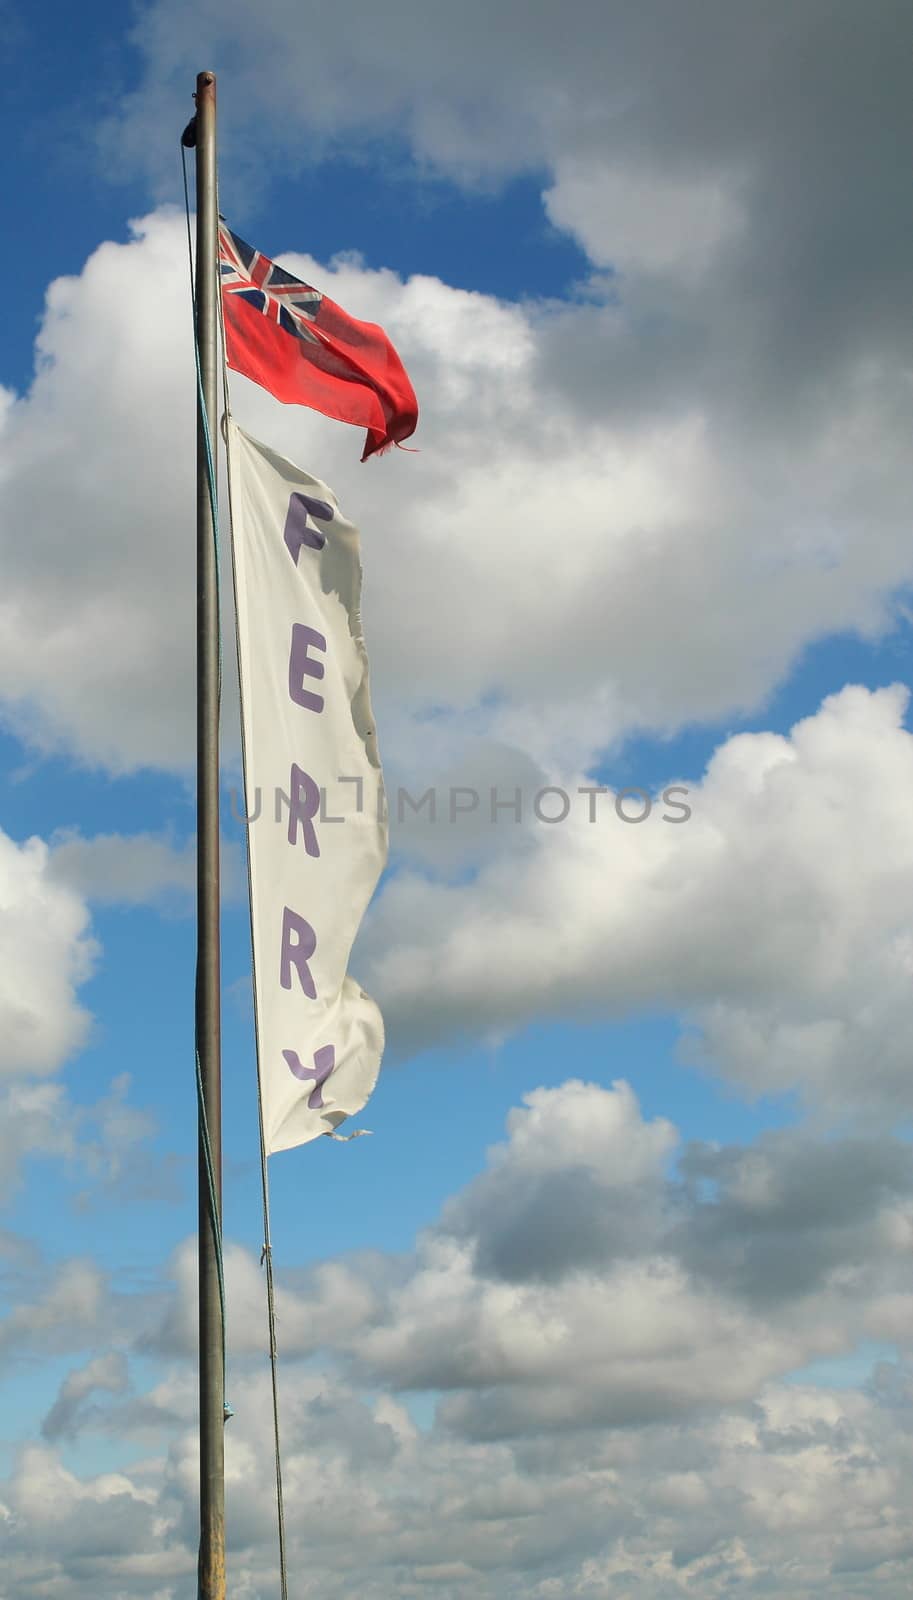 Image of a commuter ferry flag, flying in a storm with clouds